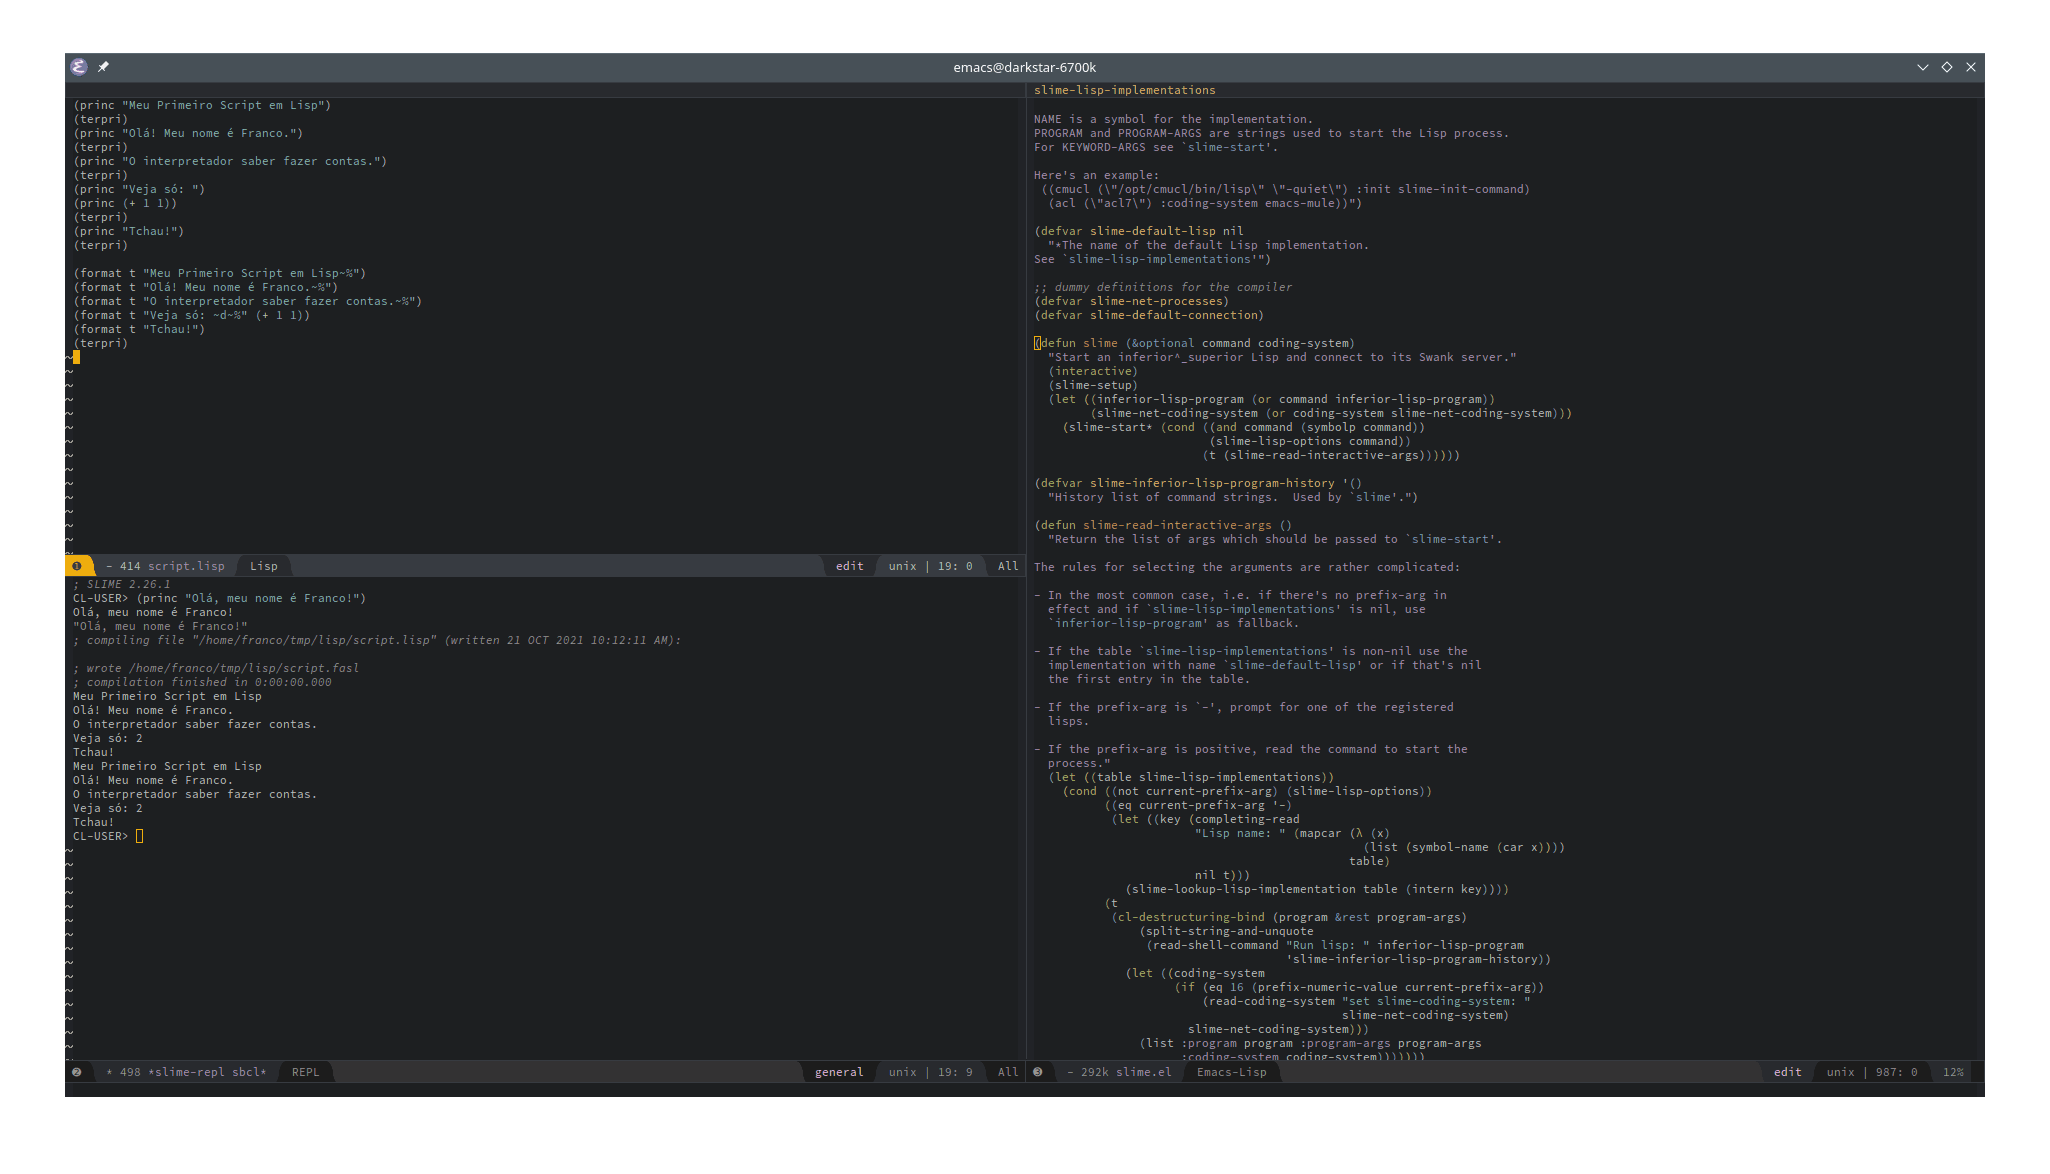 An image of GNU Emacs, a text editor for programming in LISP, with examples of the source code snippets presented in the article written in the text editor and their results on the shell. On the right side of the image, part of the source code for SLIME, which assisting programming in LISP using Emacs.